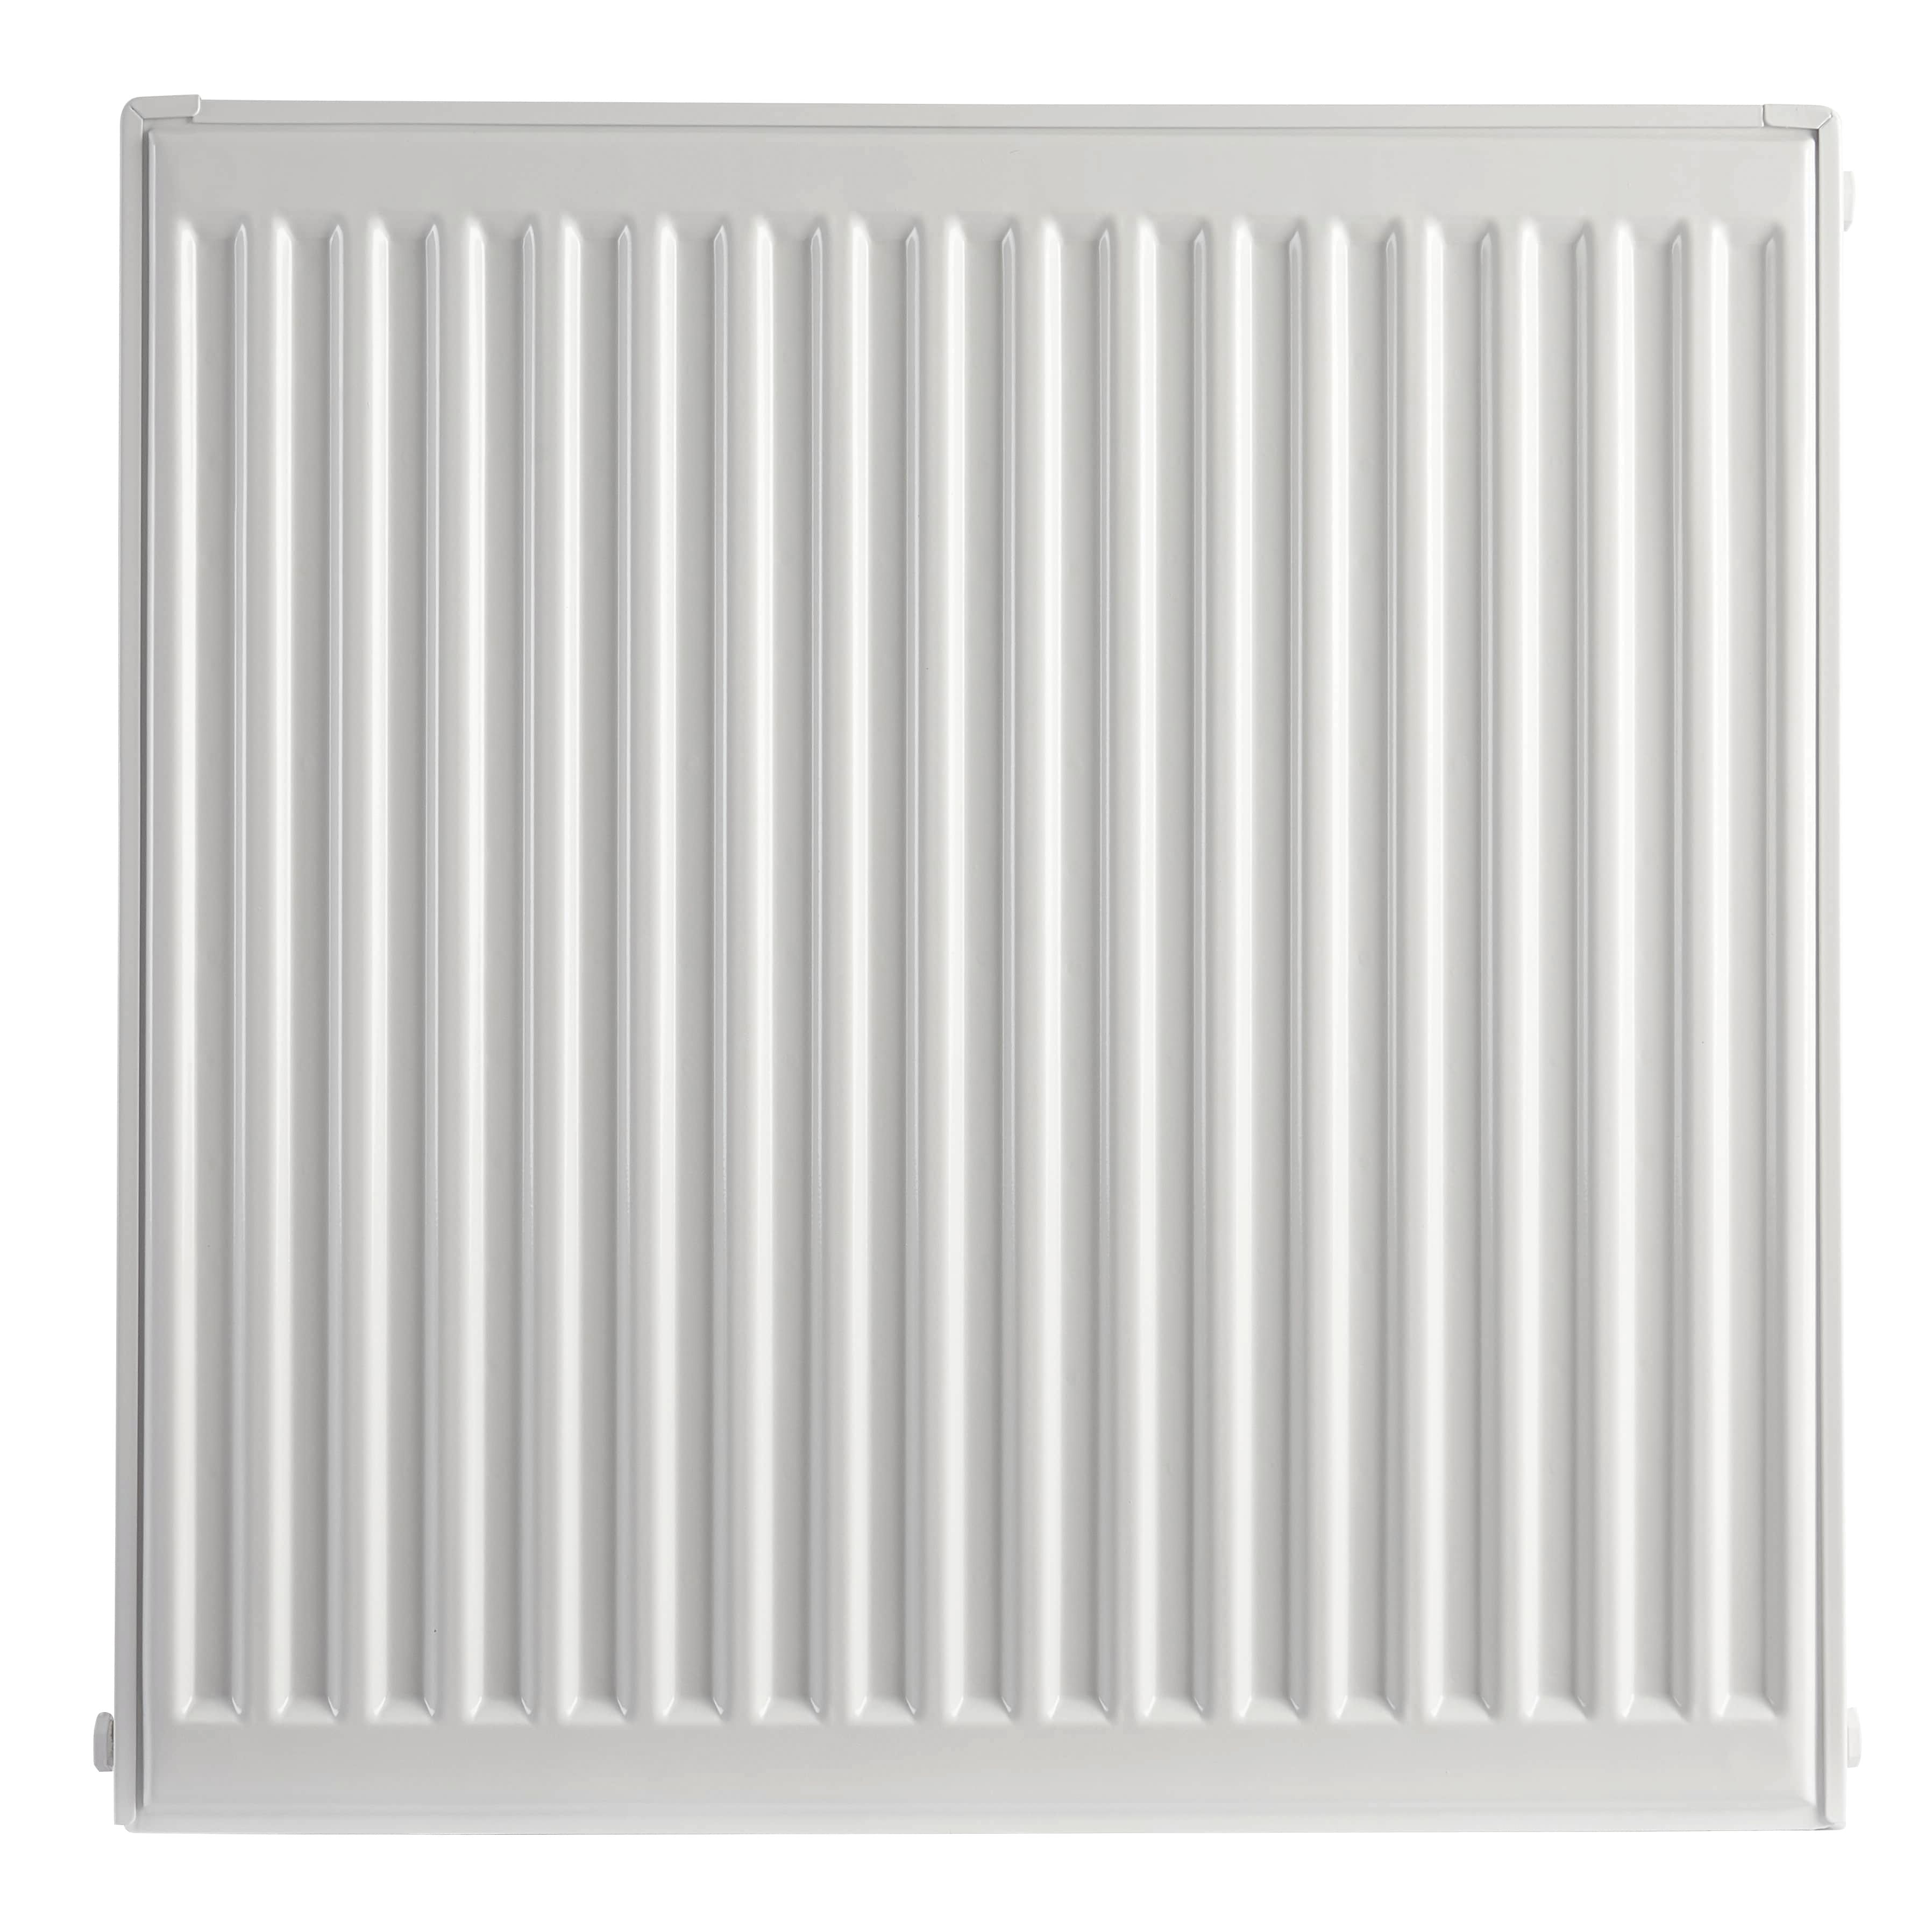 Image of Homeline by Stelrad 700 x 700mm Type 11 Single Panel Single Convector Radiator